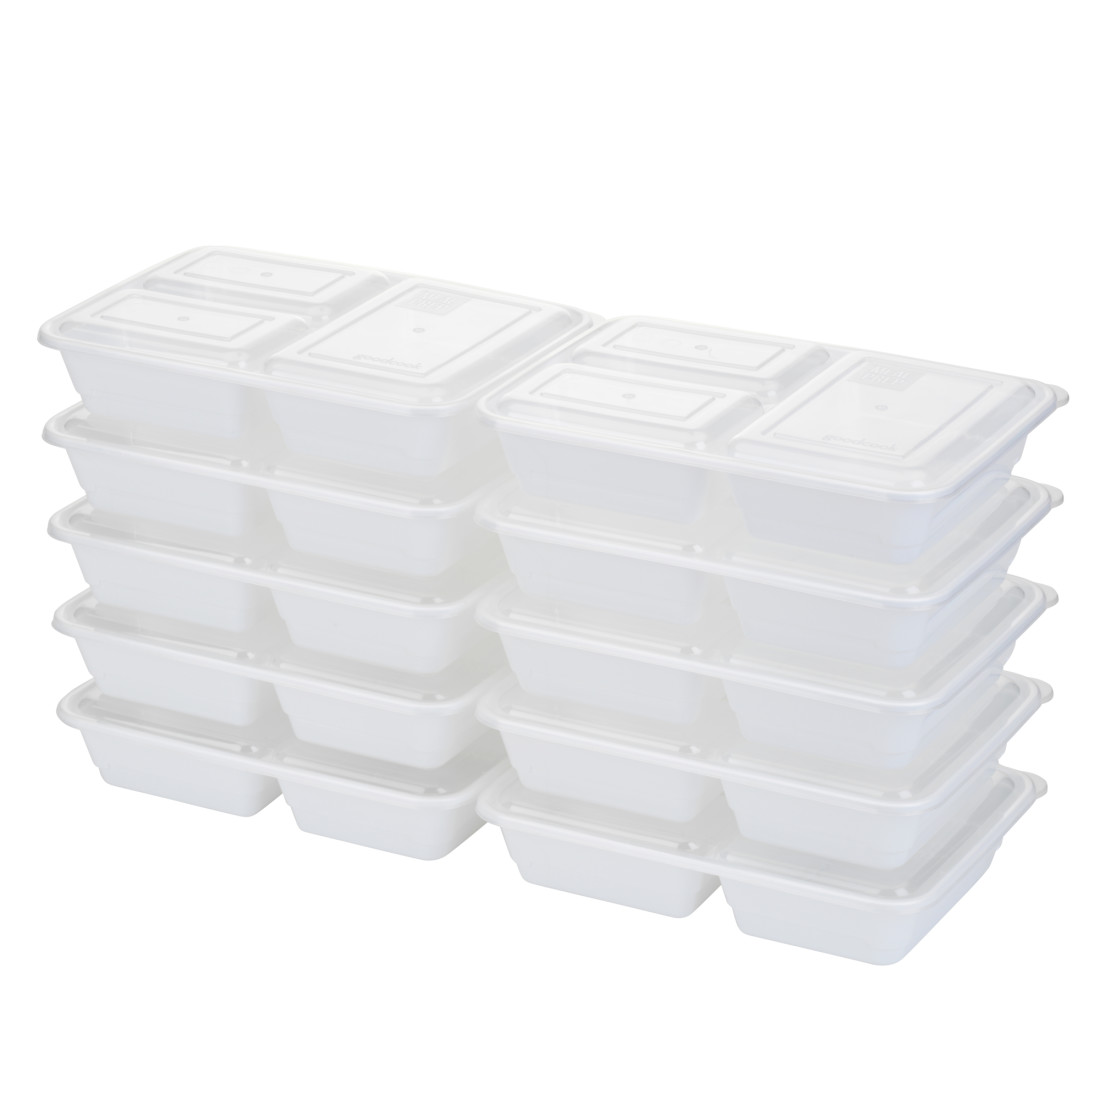 Meal Prep 2 Compartments, Rectangle, 10-Piece Set - GoodCook